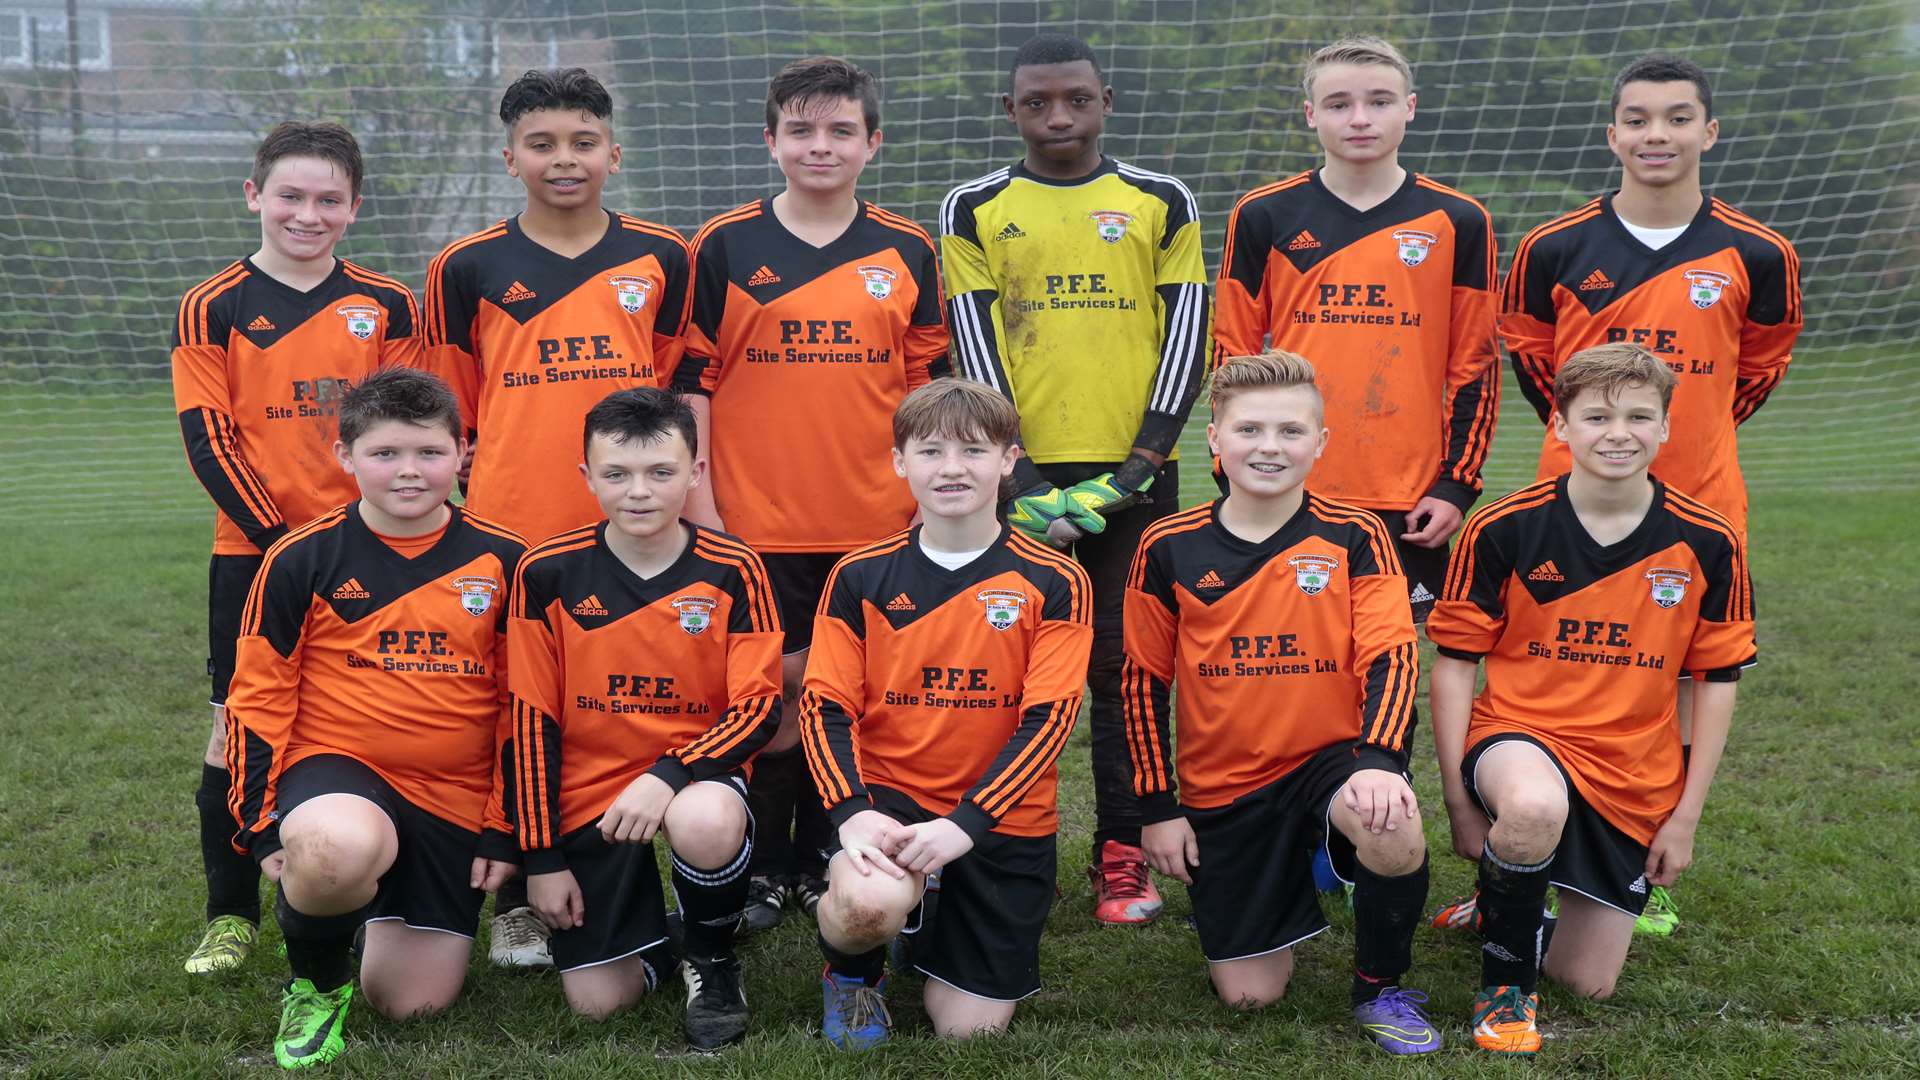 Lordswood Youth under-14s were 8-0 winners over Woodpecker Hi in Division 1 Picture: Martin Apps